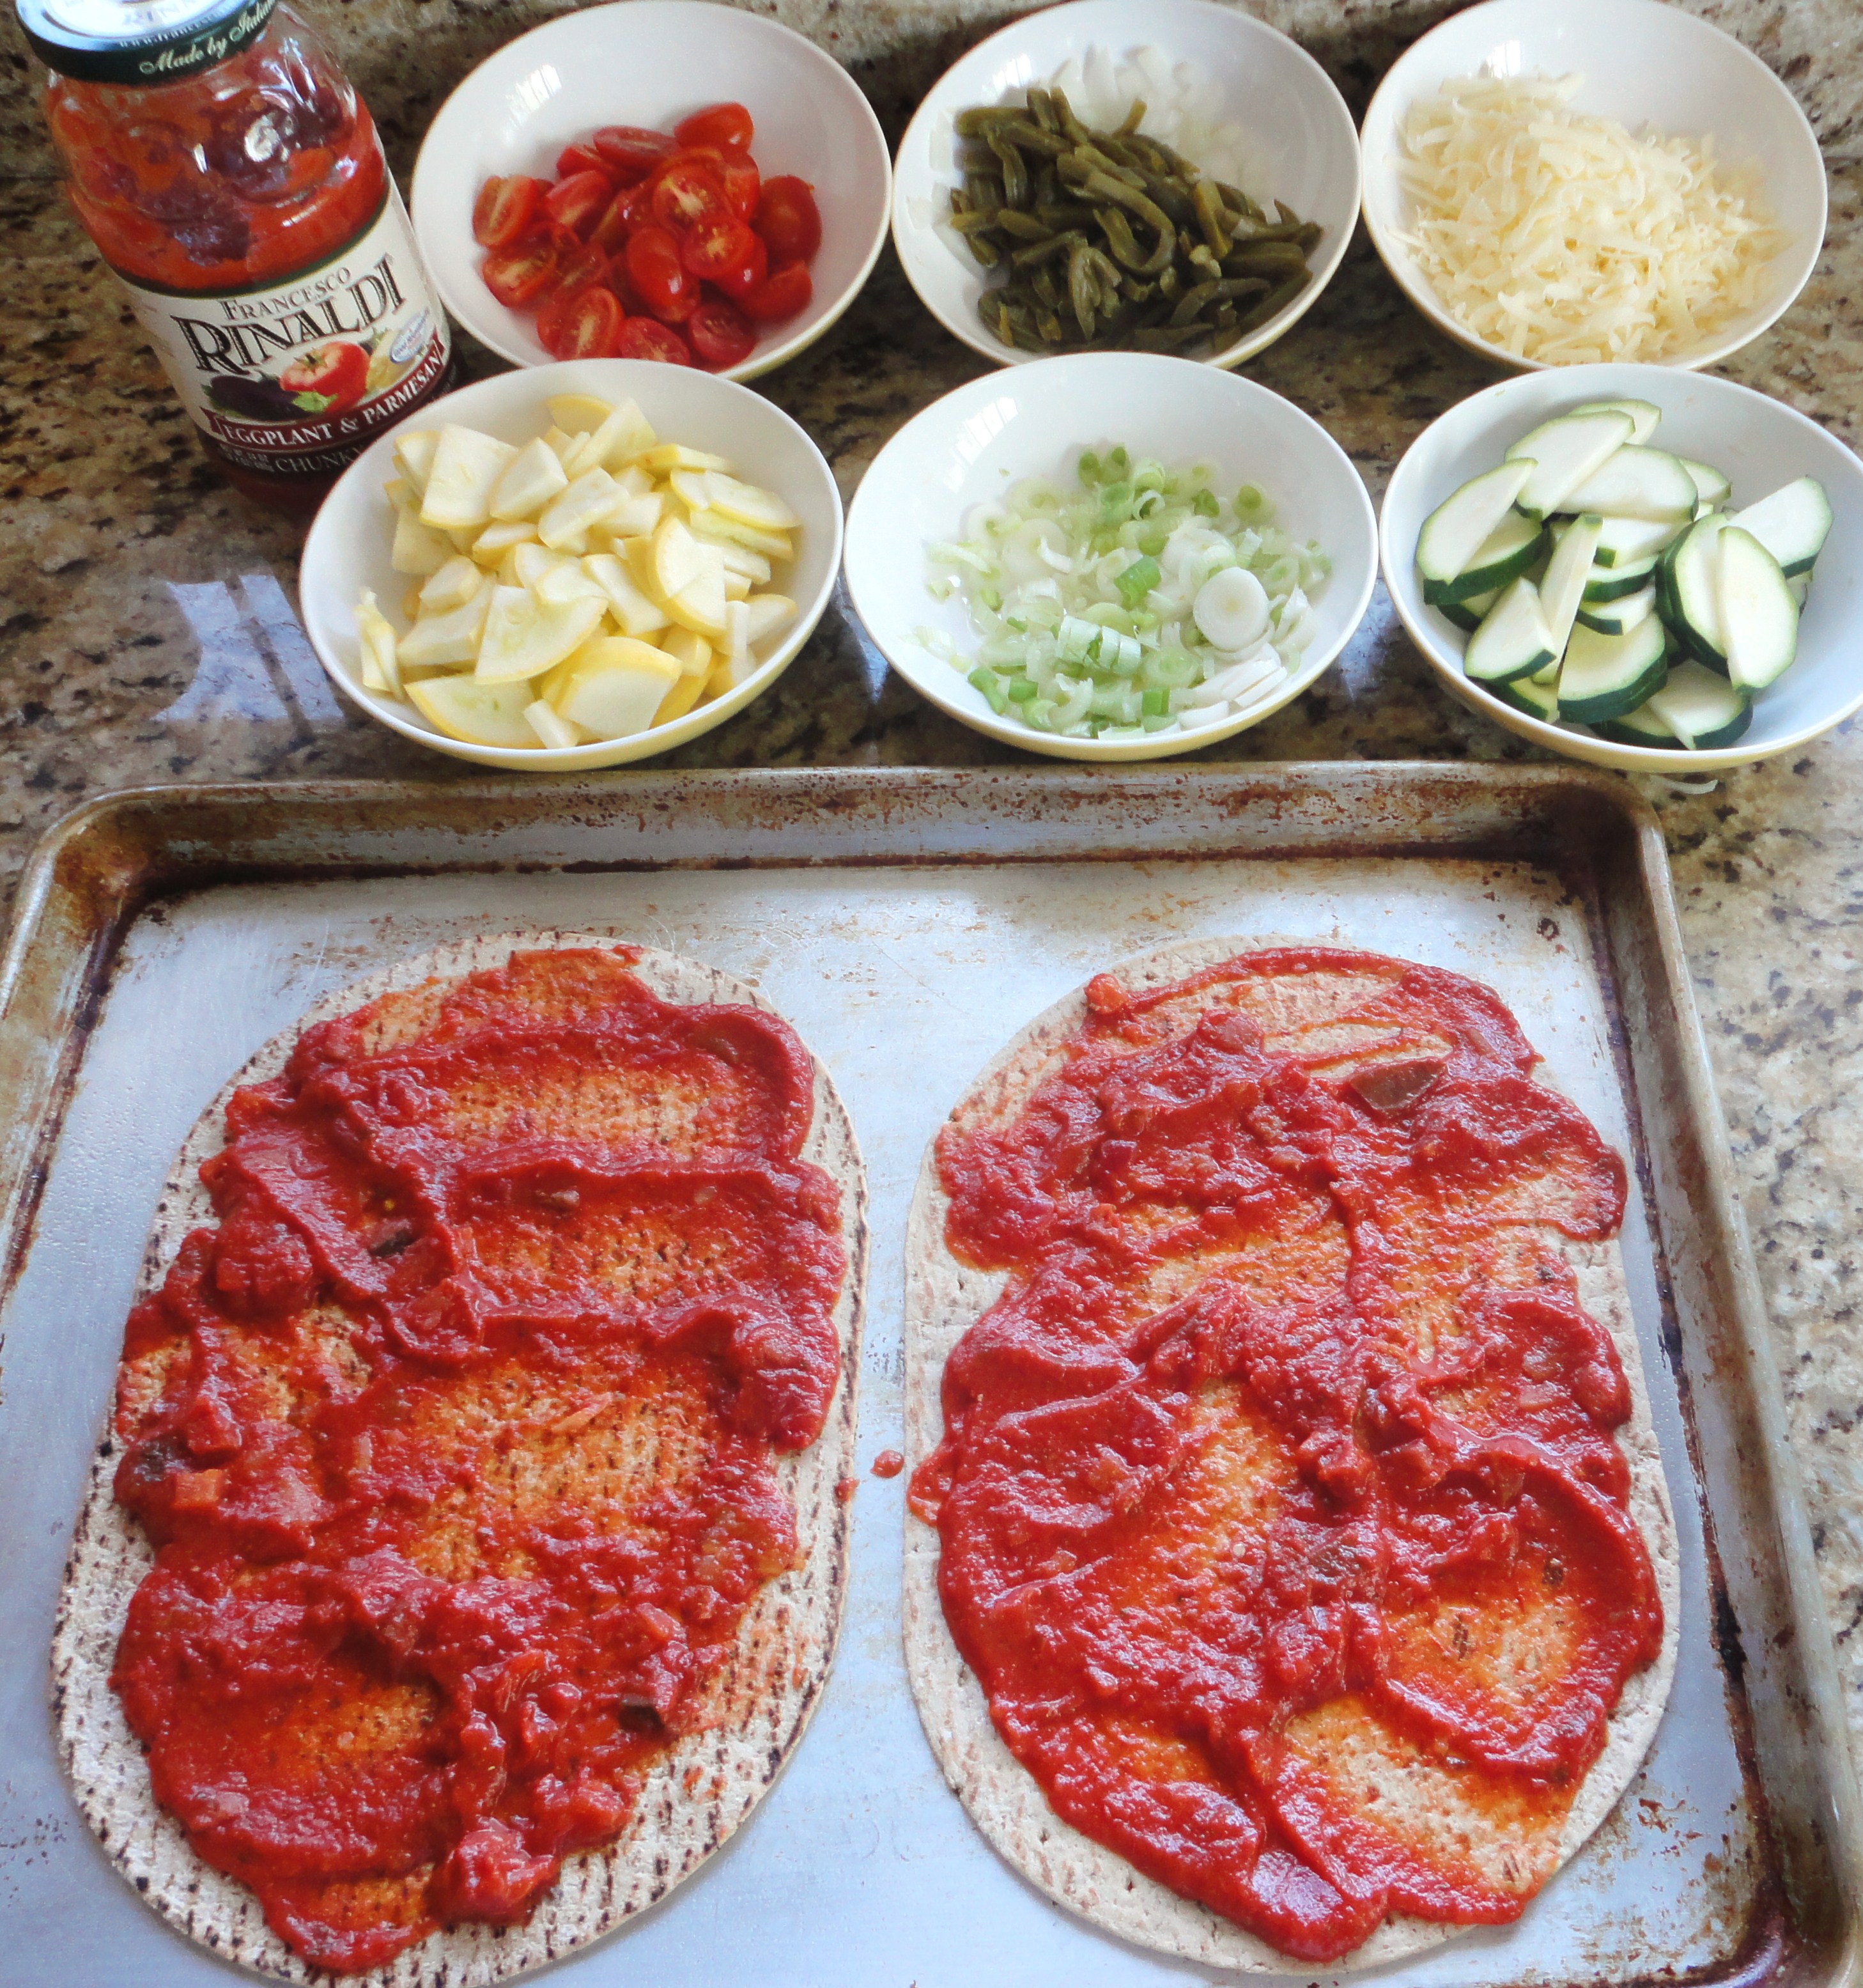 How to Make Homemade Pizza Using Everything in Your Refrigerator